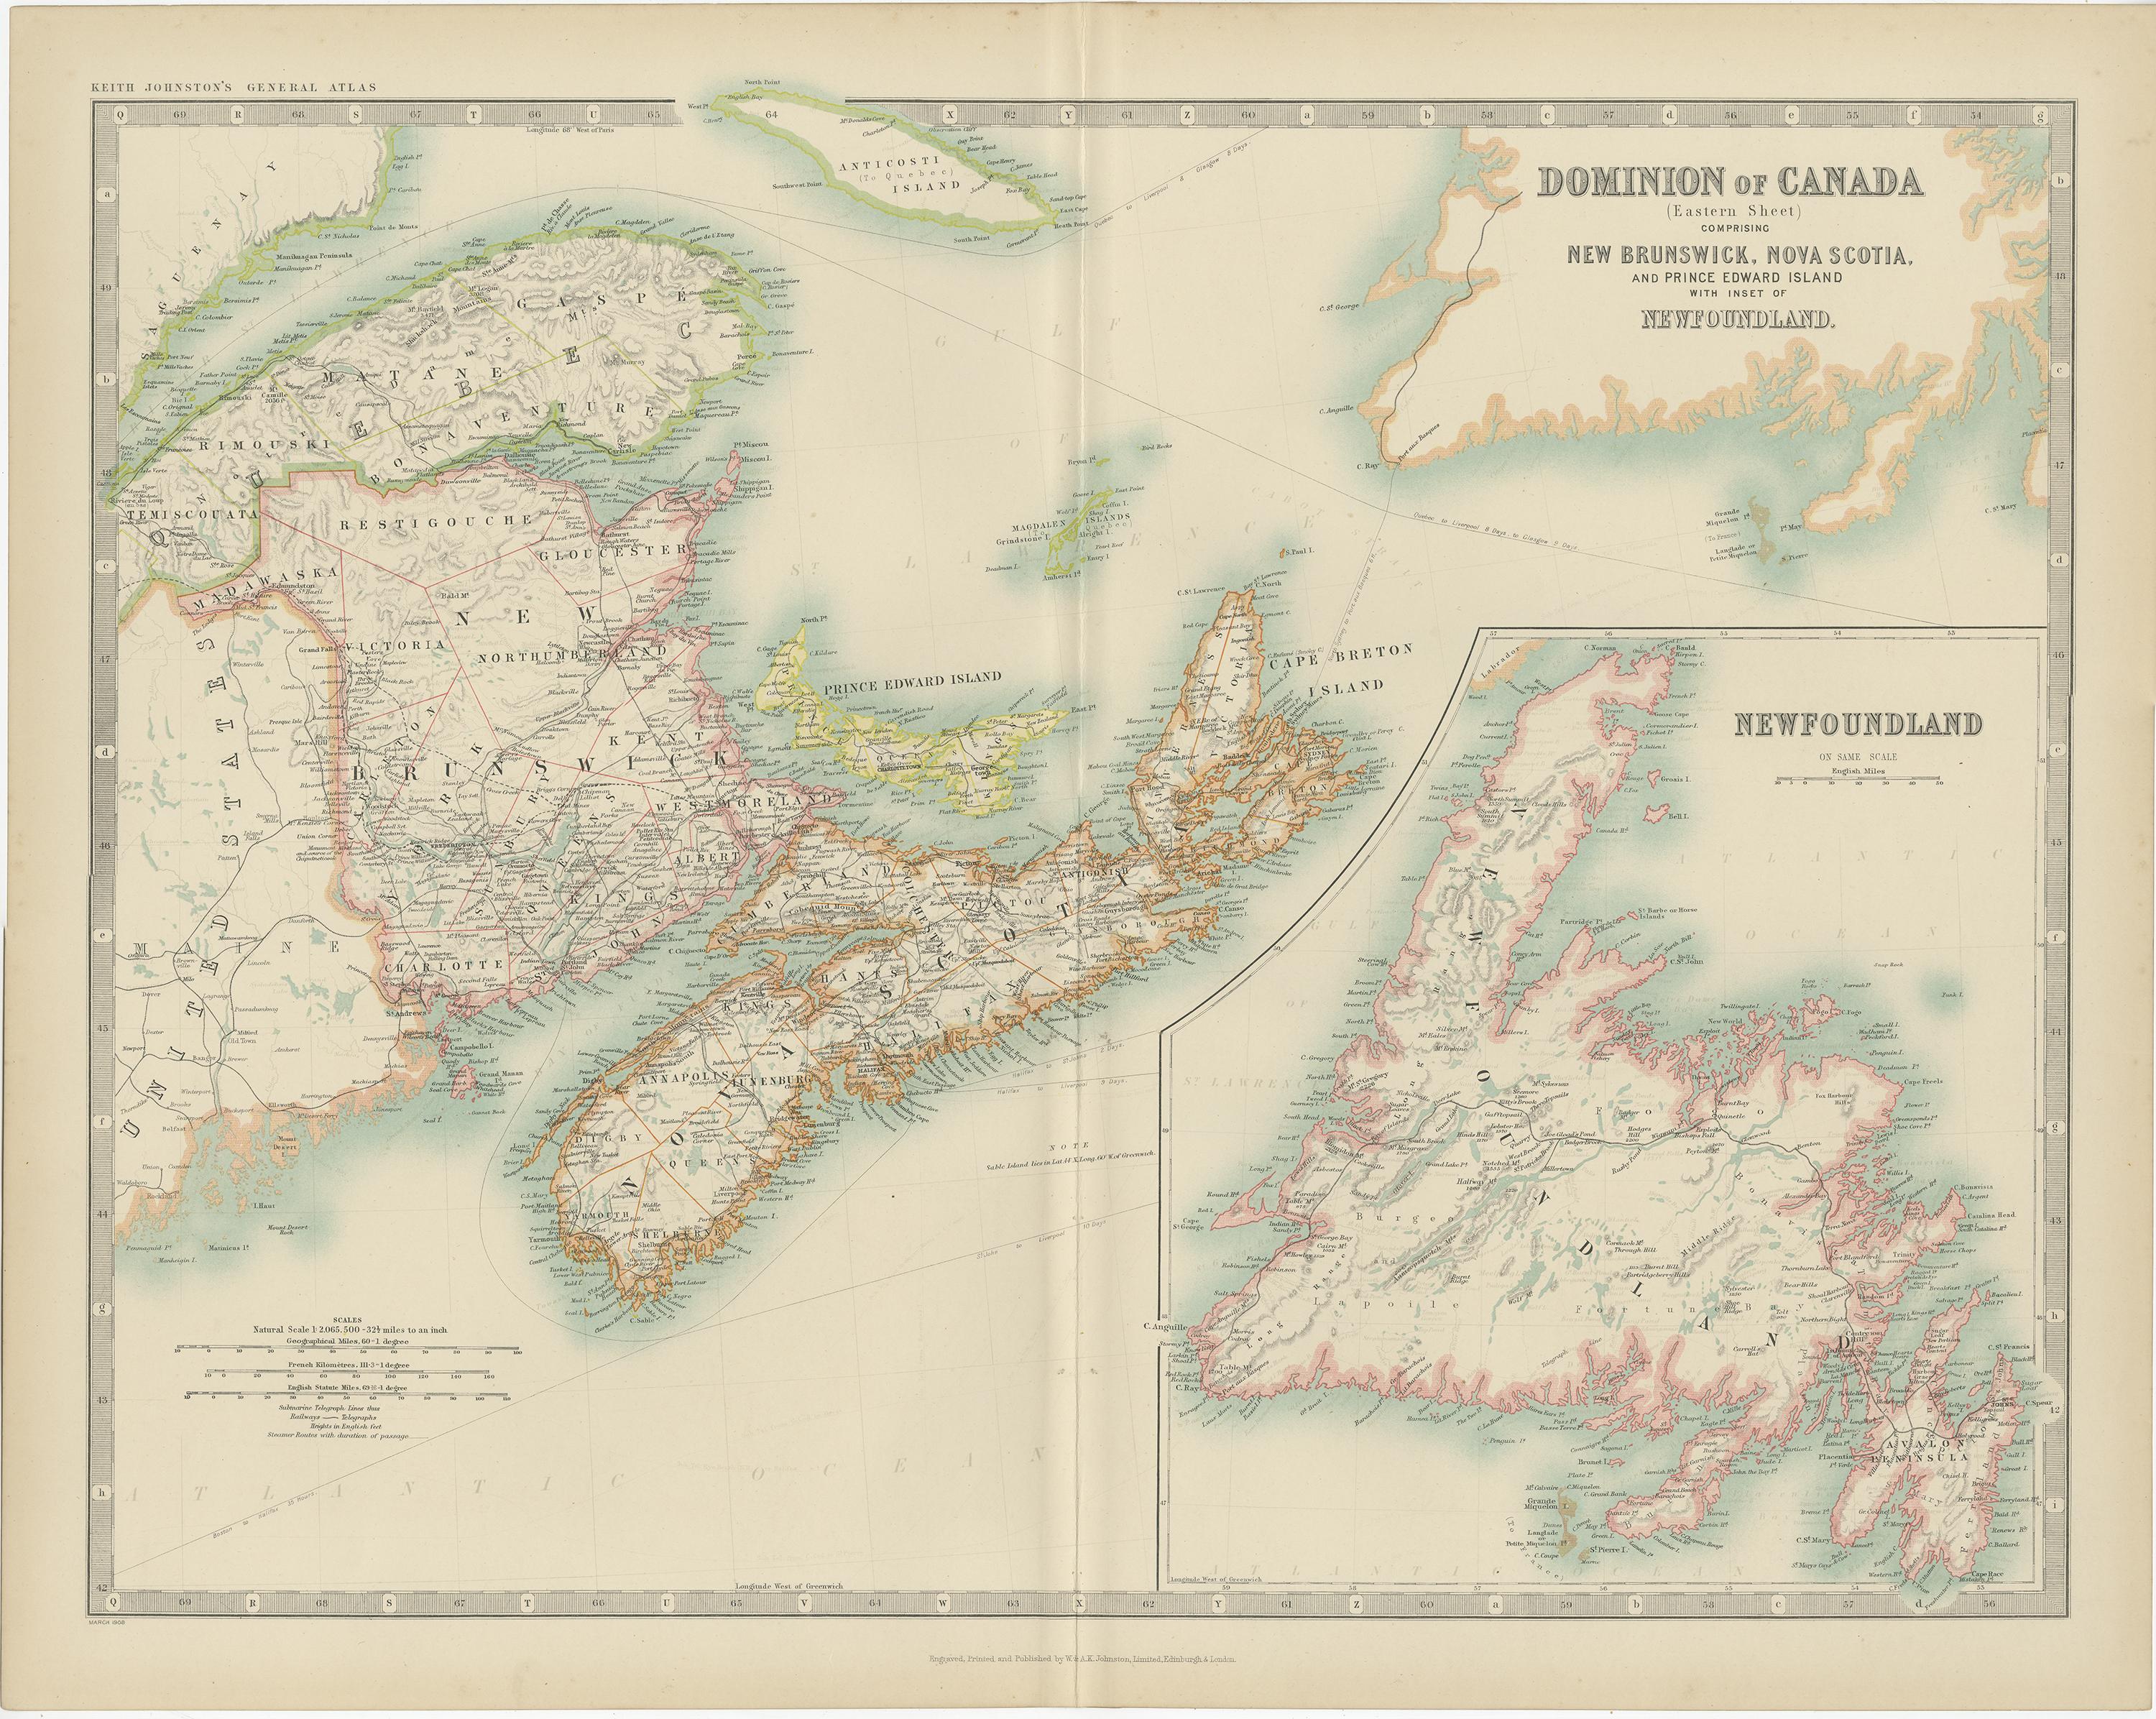 Antique map titled 'Dominion of Canada'. Original antique map of Canada. With inset map of Newfoundland. This map originates from the ‘Royal Atlas of Modern Geography’. Published by W. & A.K. Johnston, 1909.